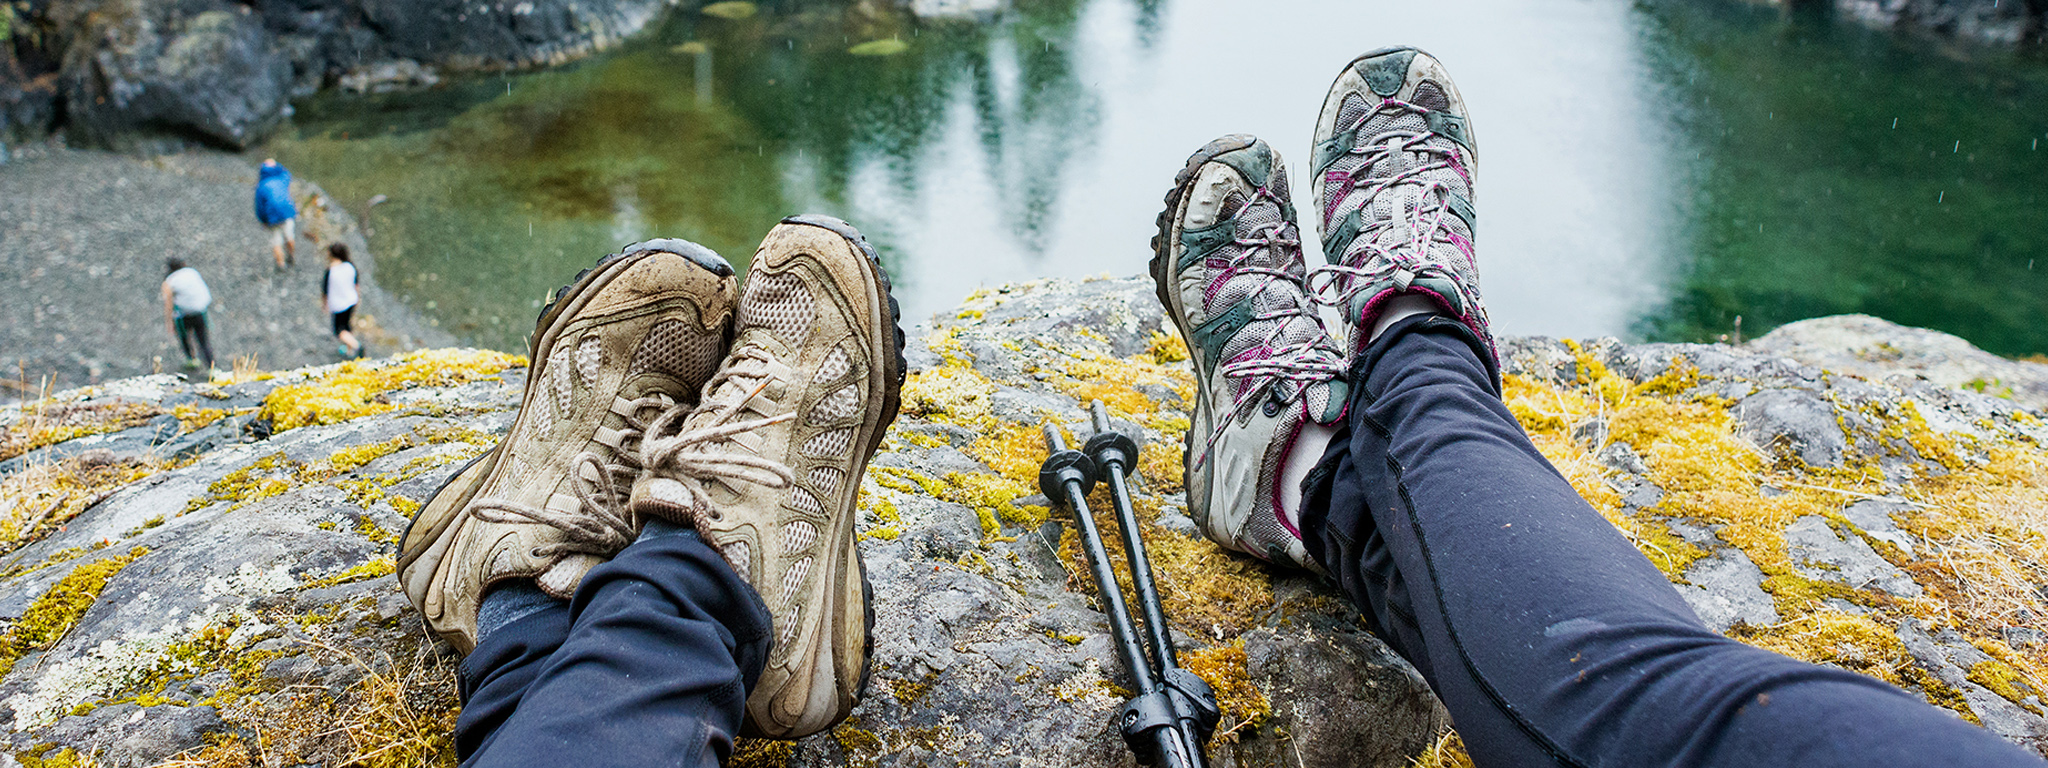 The feet of two people dangle over the edge of a rock overlooking a lake.